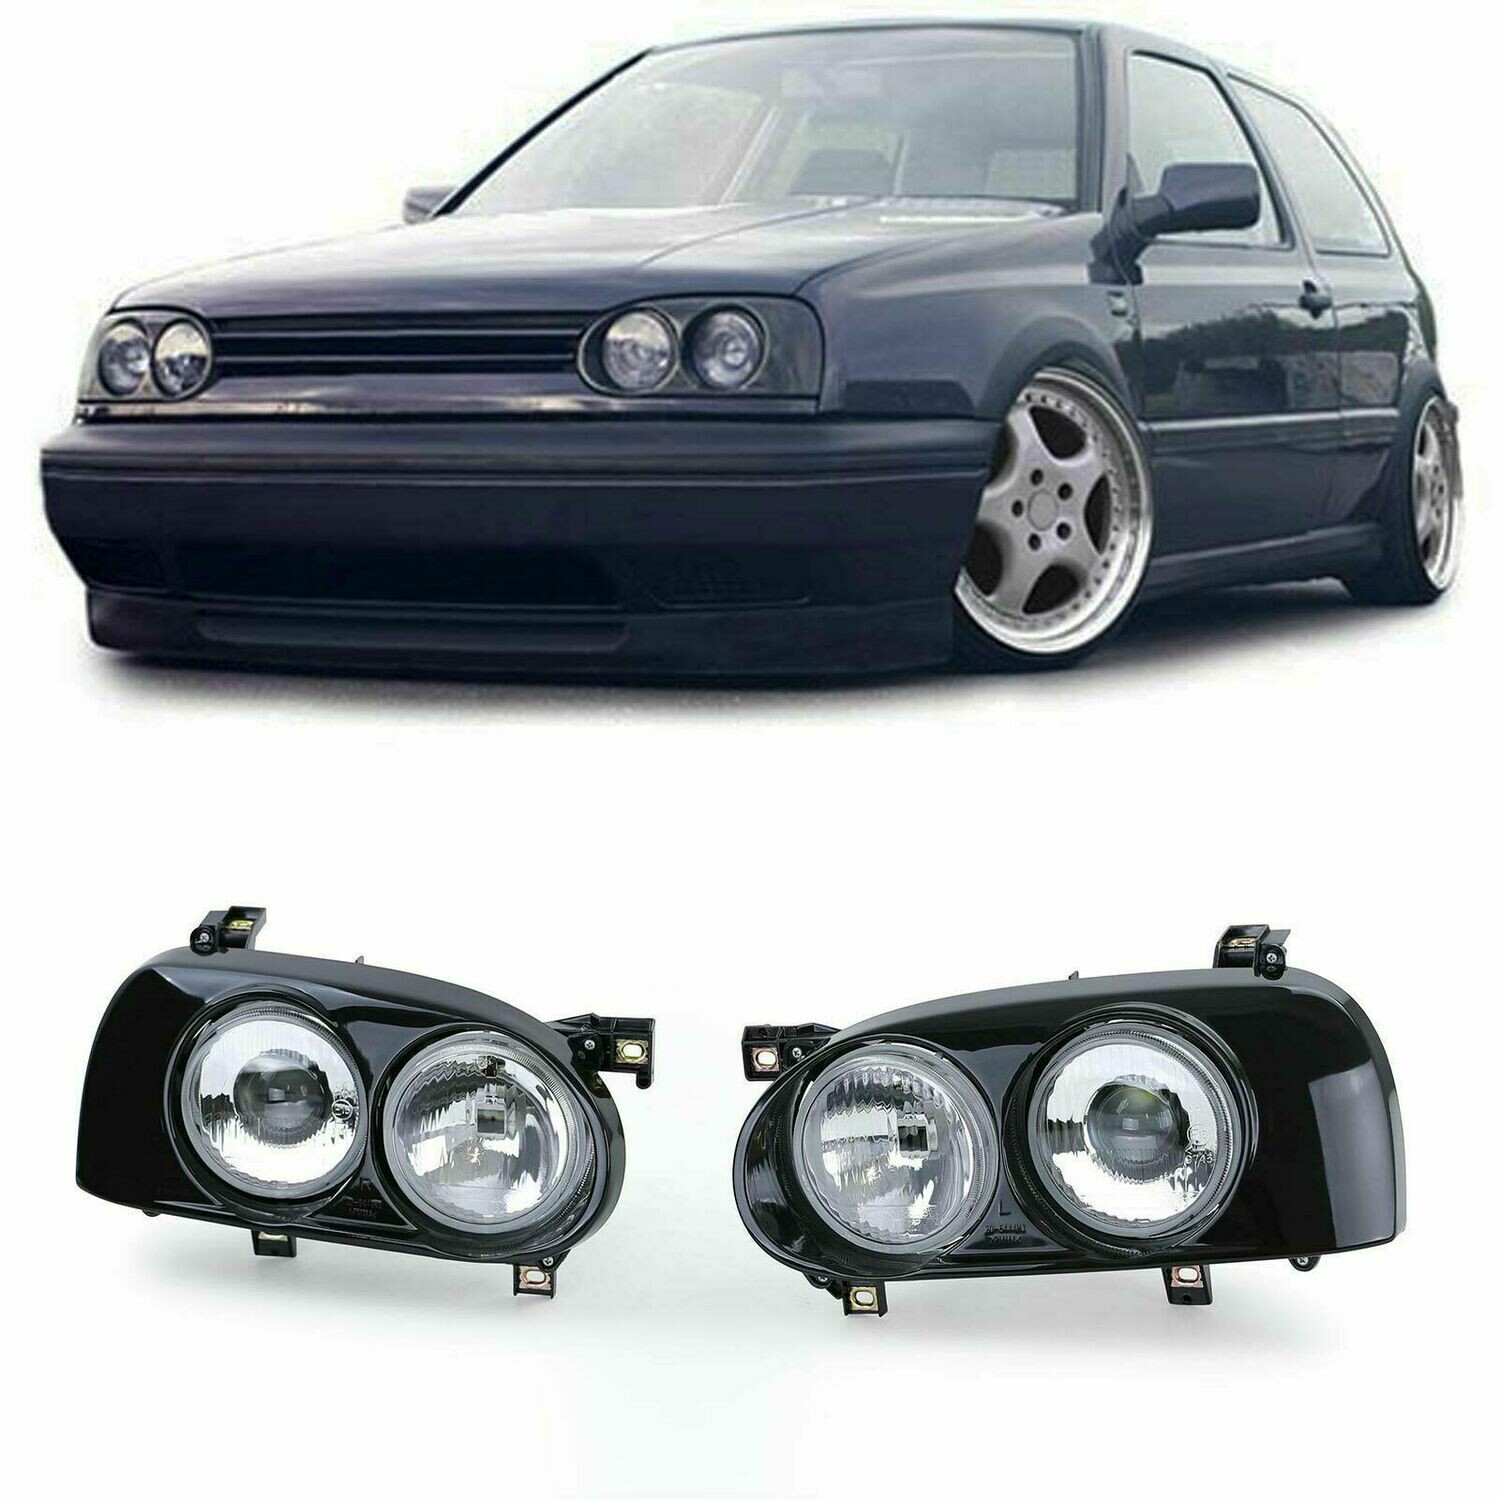 Front Round headlights for VW GOLF 3 91-97 NEW